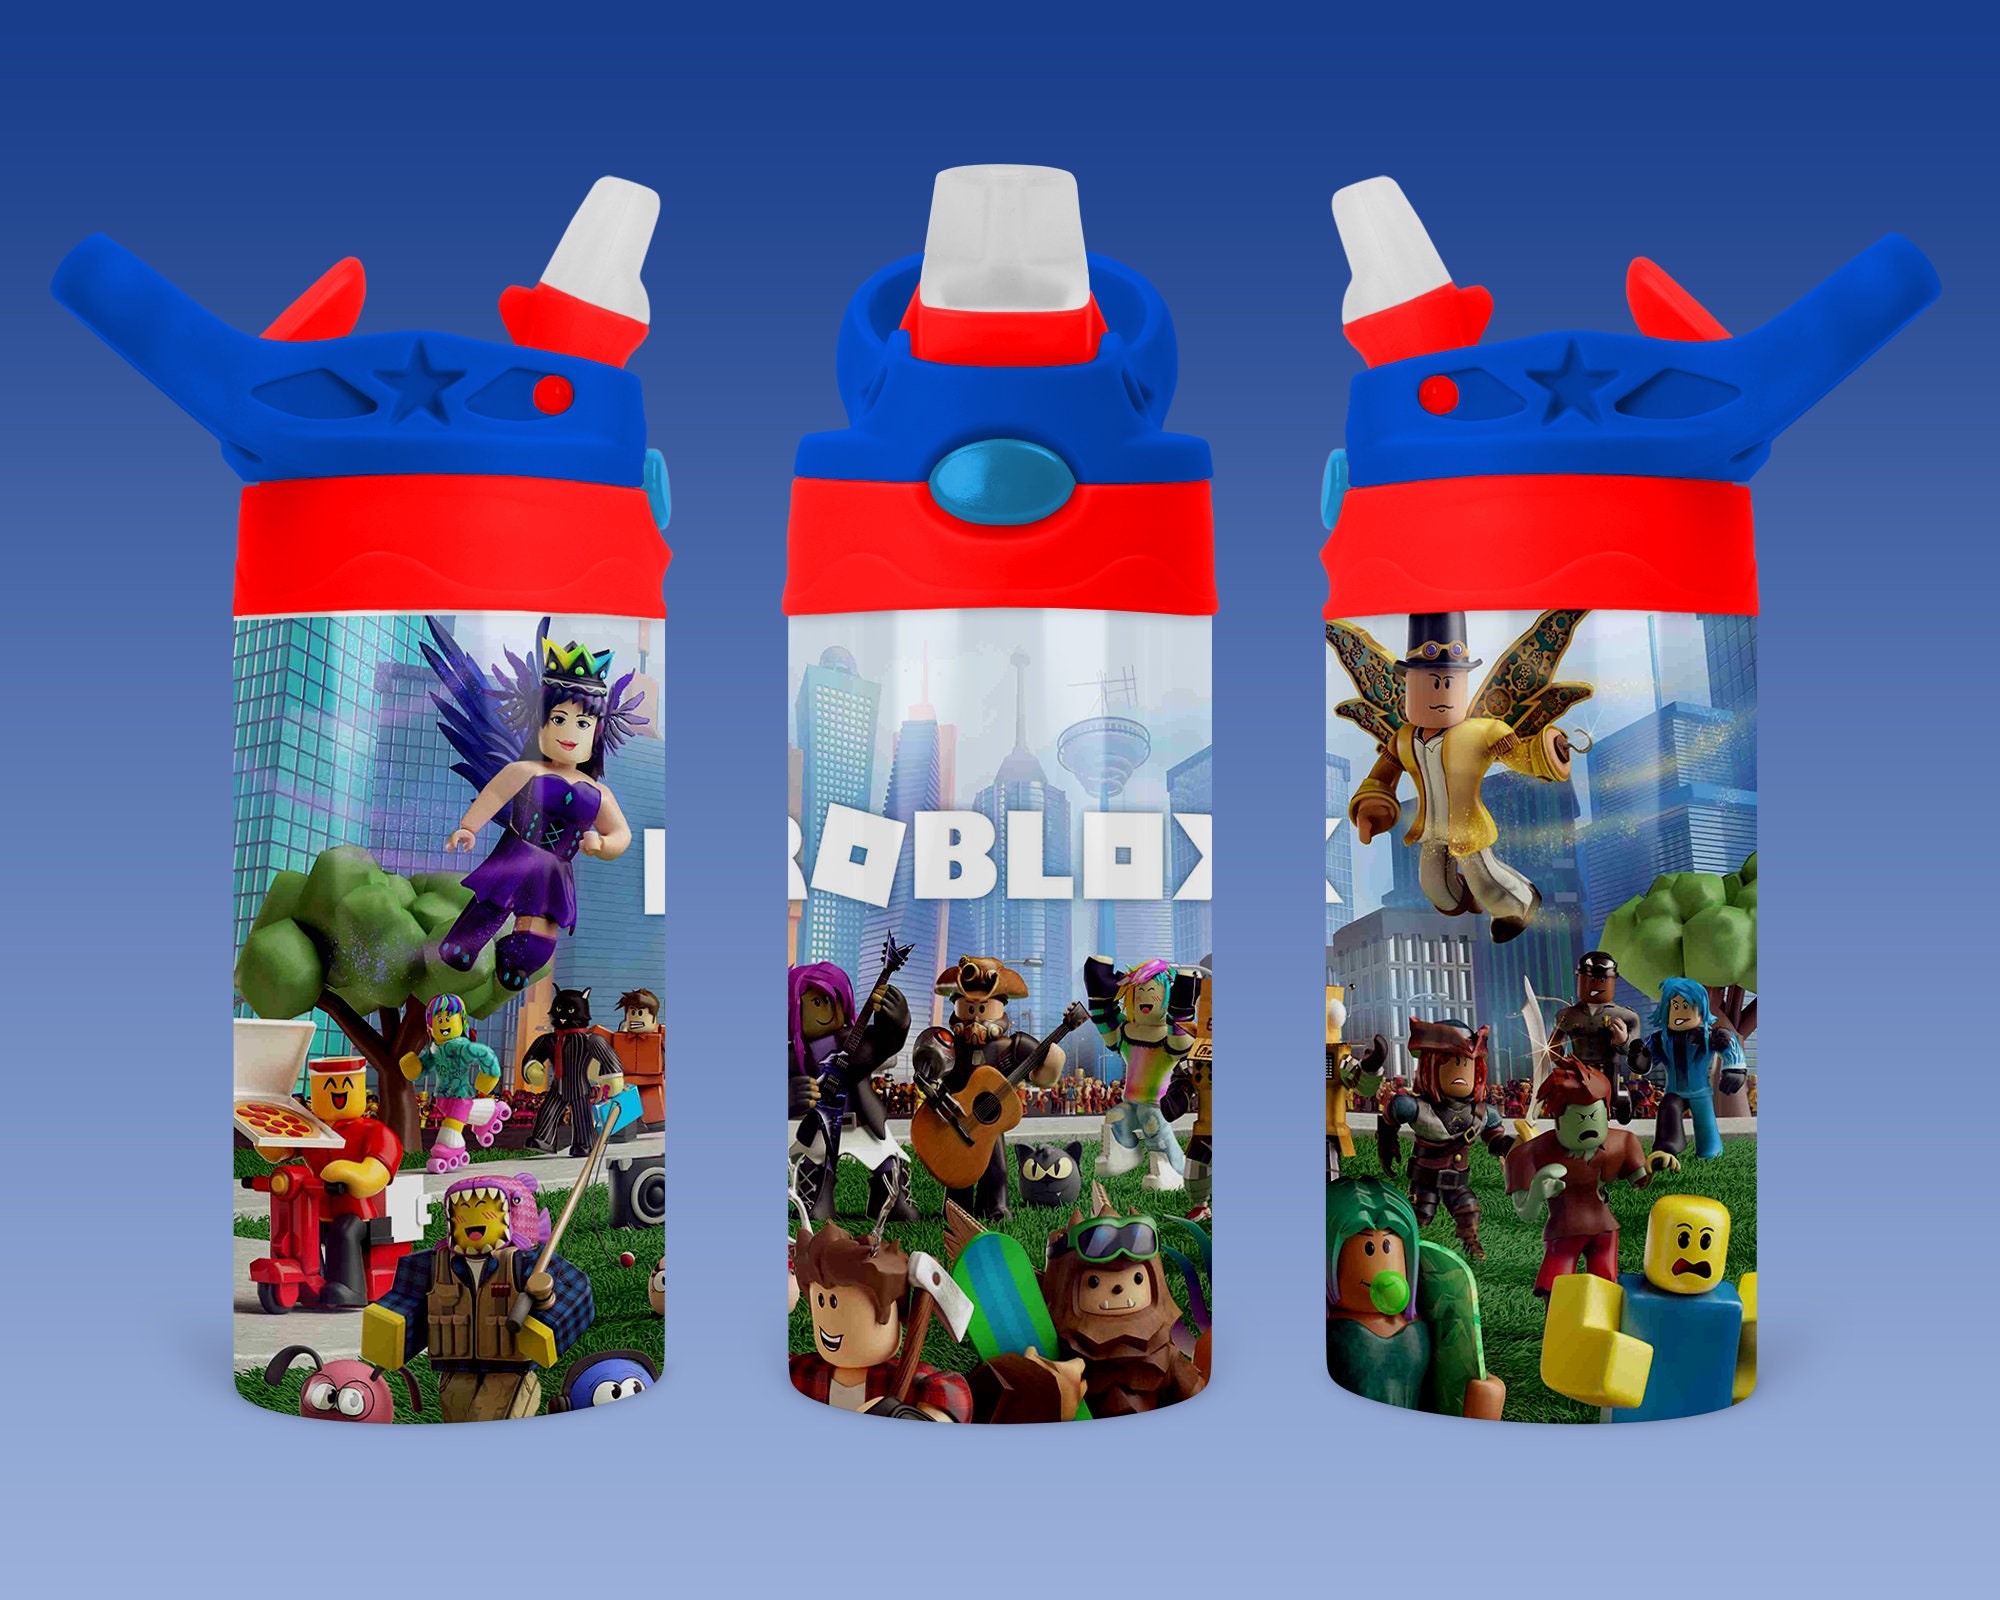 Roblox girls png Roblox png file sublimation file tumbler wrap digital  downloads kids tumblers -  Portugal